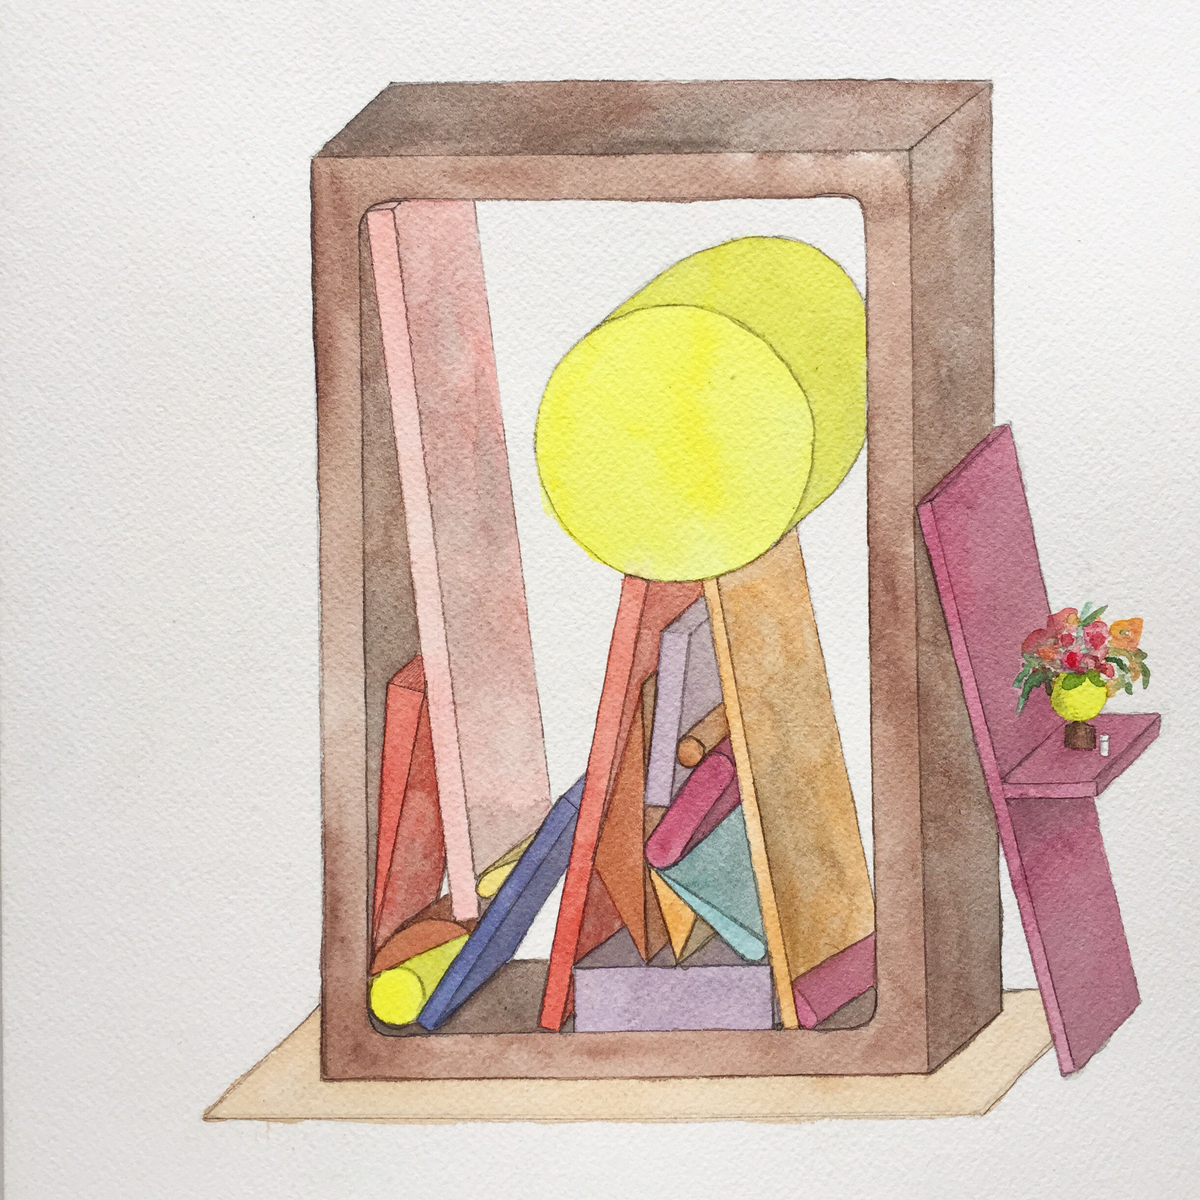 18.Sun_Standers_2015_watercolor_and_pencil_on_paper